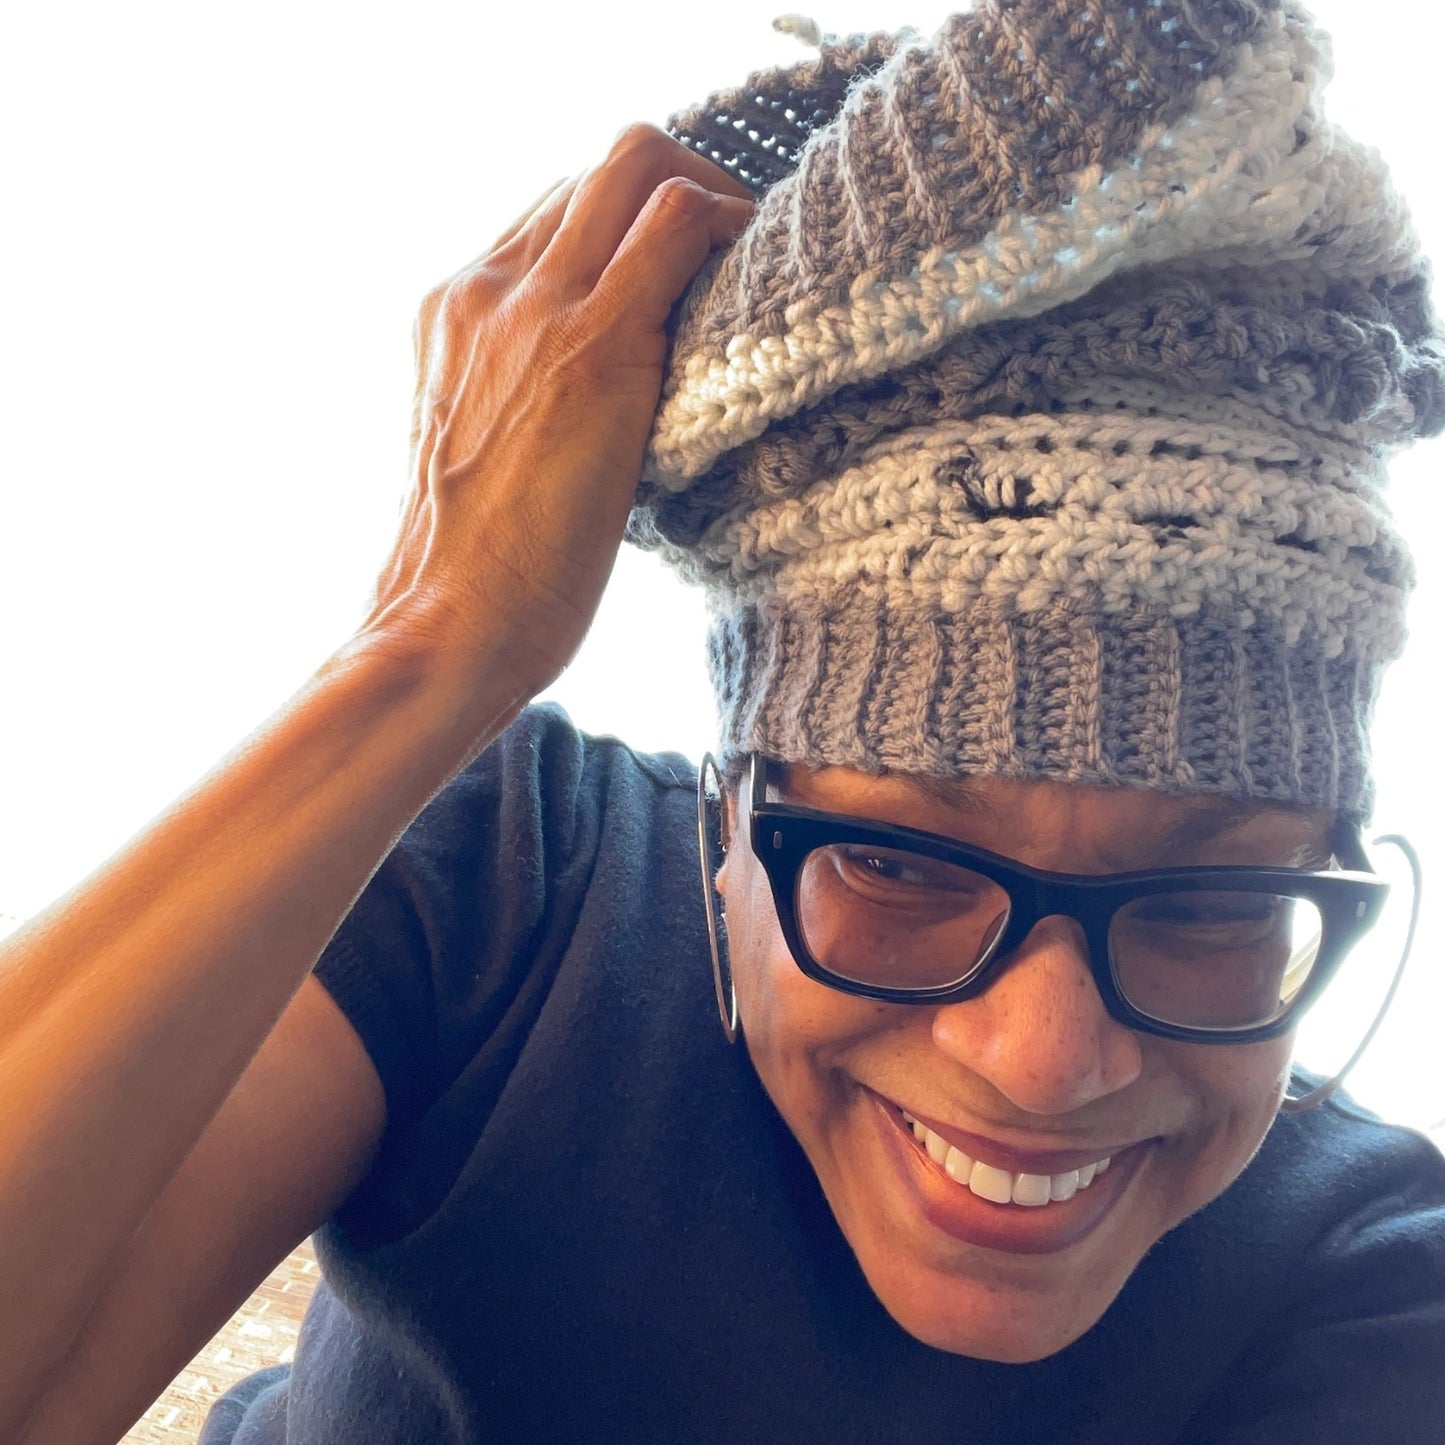 Yarn Gone Wild -Yarn Craft Crochet Hat From the All The Feel Izit Collection